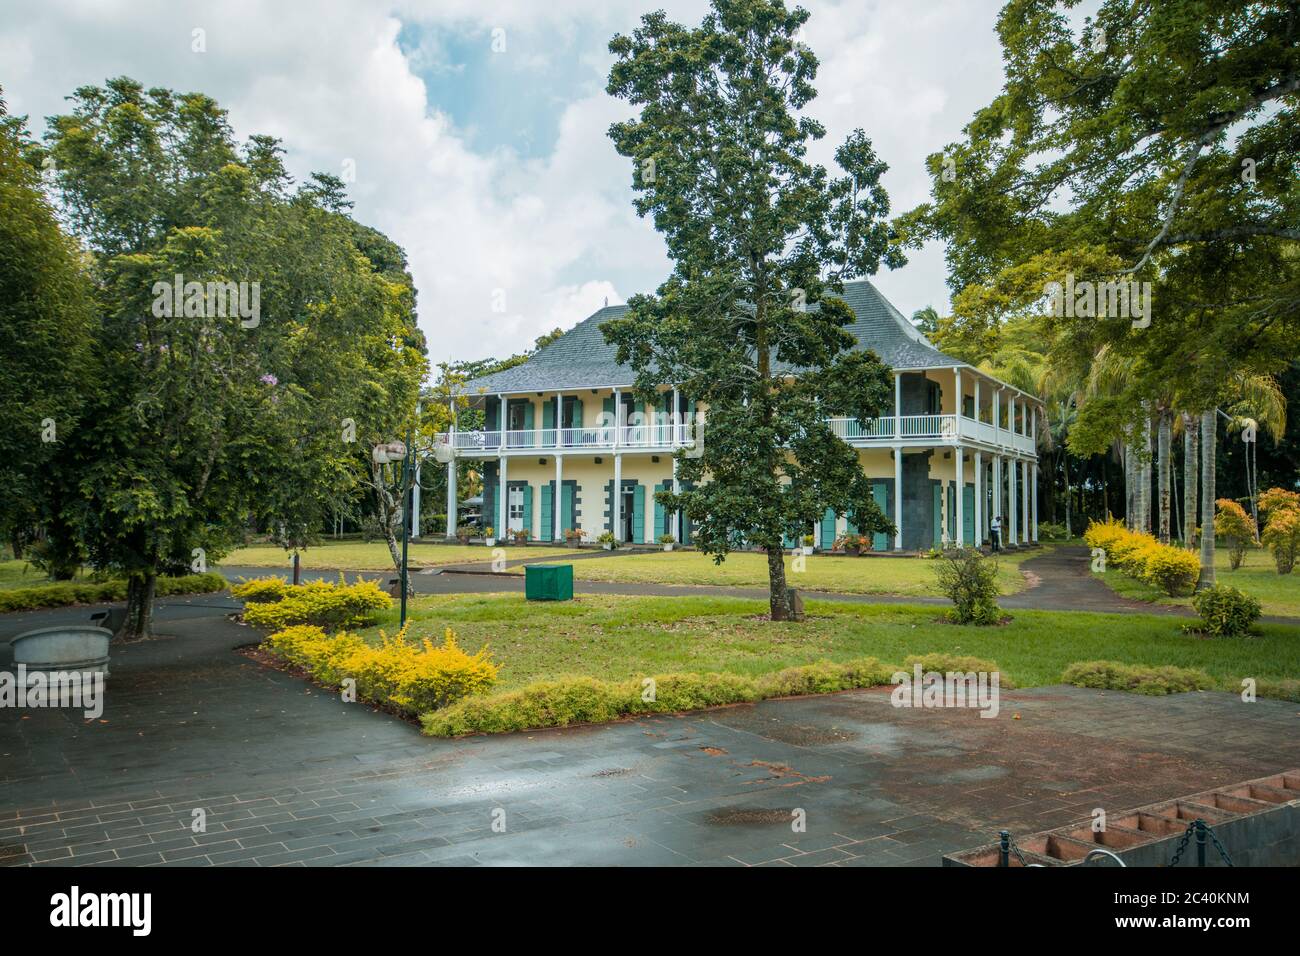 Old secession residence in Botanical Garden Pamplemousses, Mauritius. Stock Photo